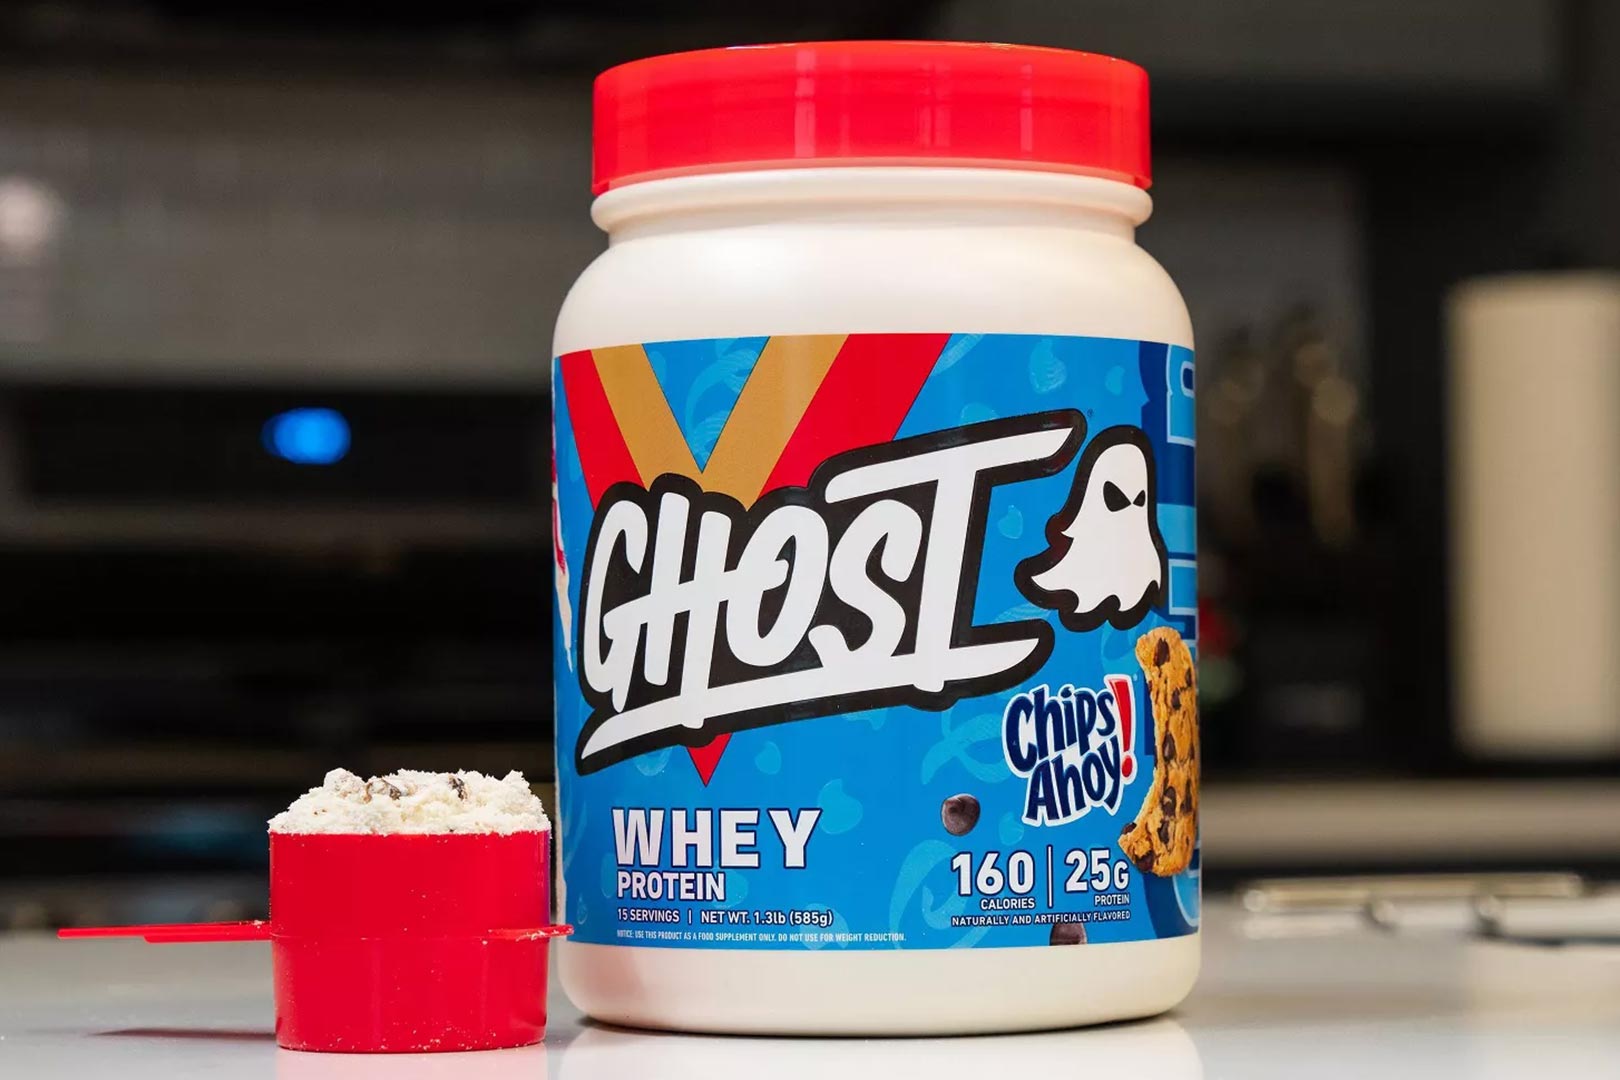 https://www.stack3d.com/wp-content/uploads/2023/03/ghost-whey-and-hydration-at-target.jpg